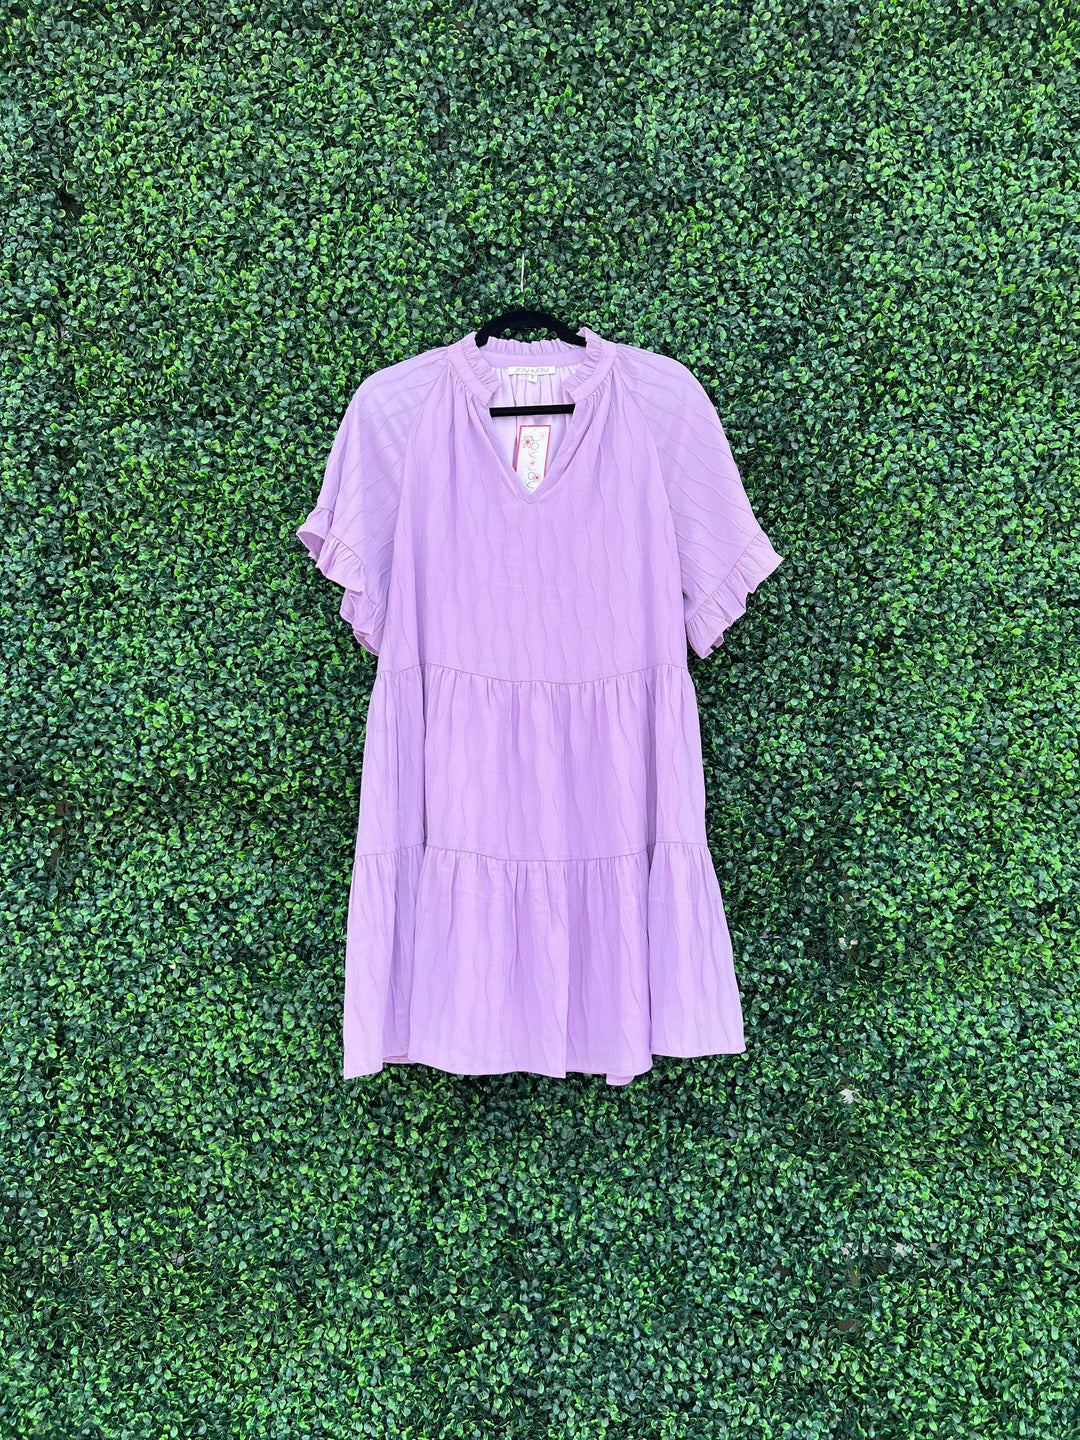 Unique Lavender dress from dress shop in Housotn Texas Tres Chic on Eastside Street